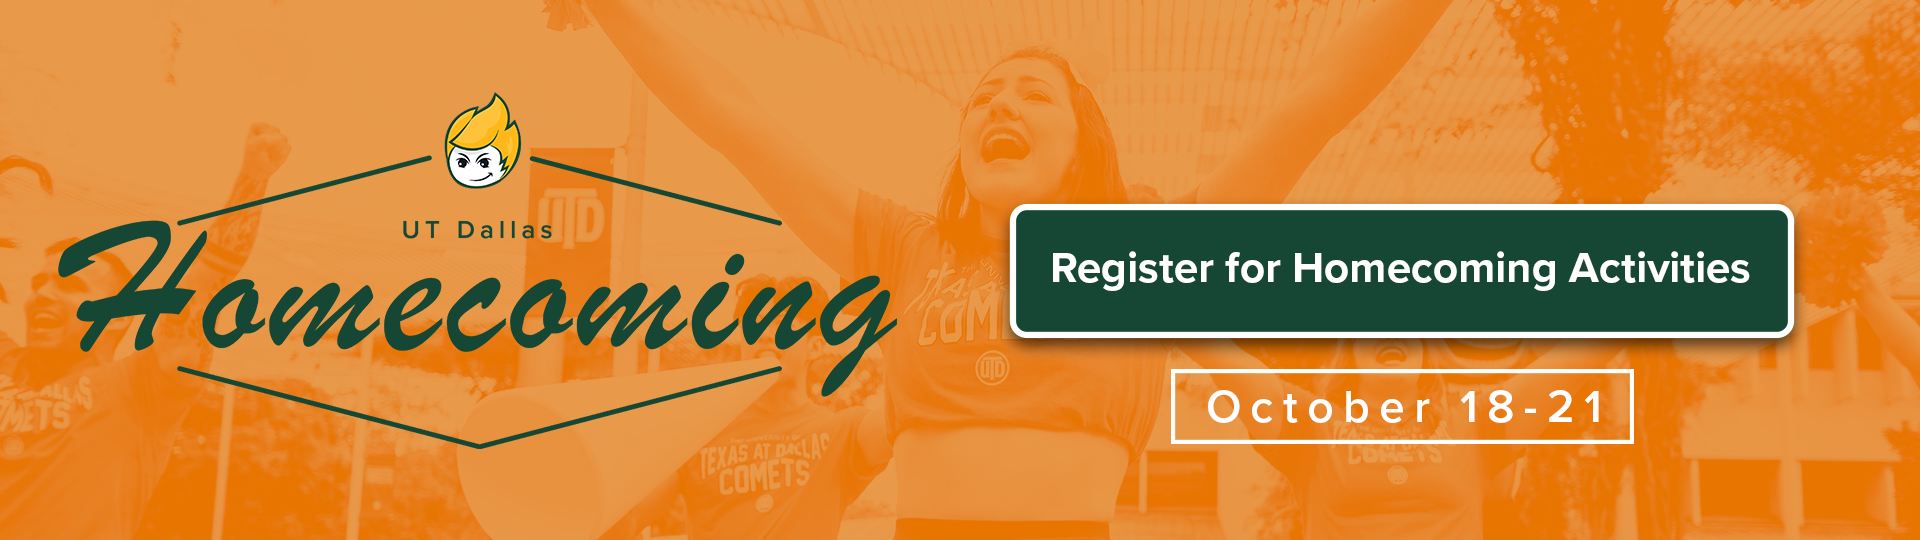 Register for homecoming activites. UT Dallas Homecoming.